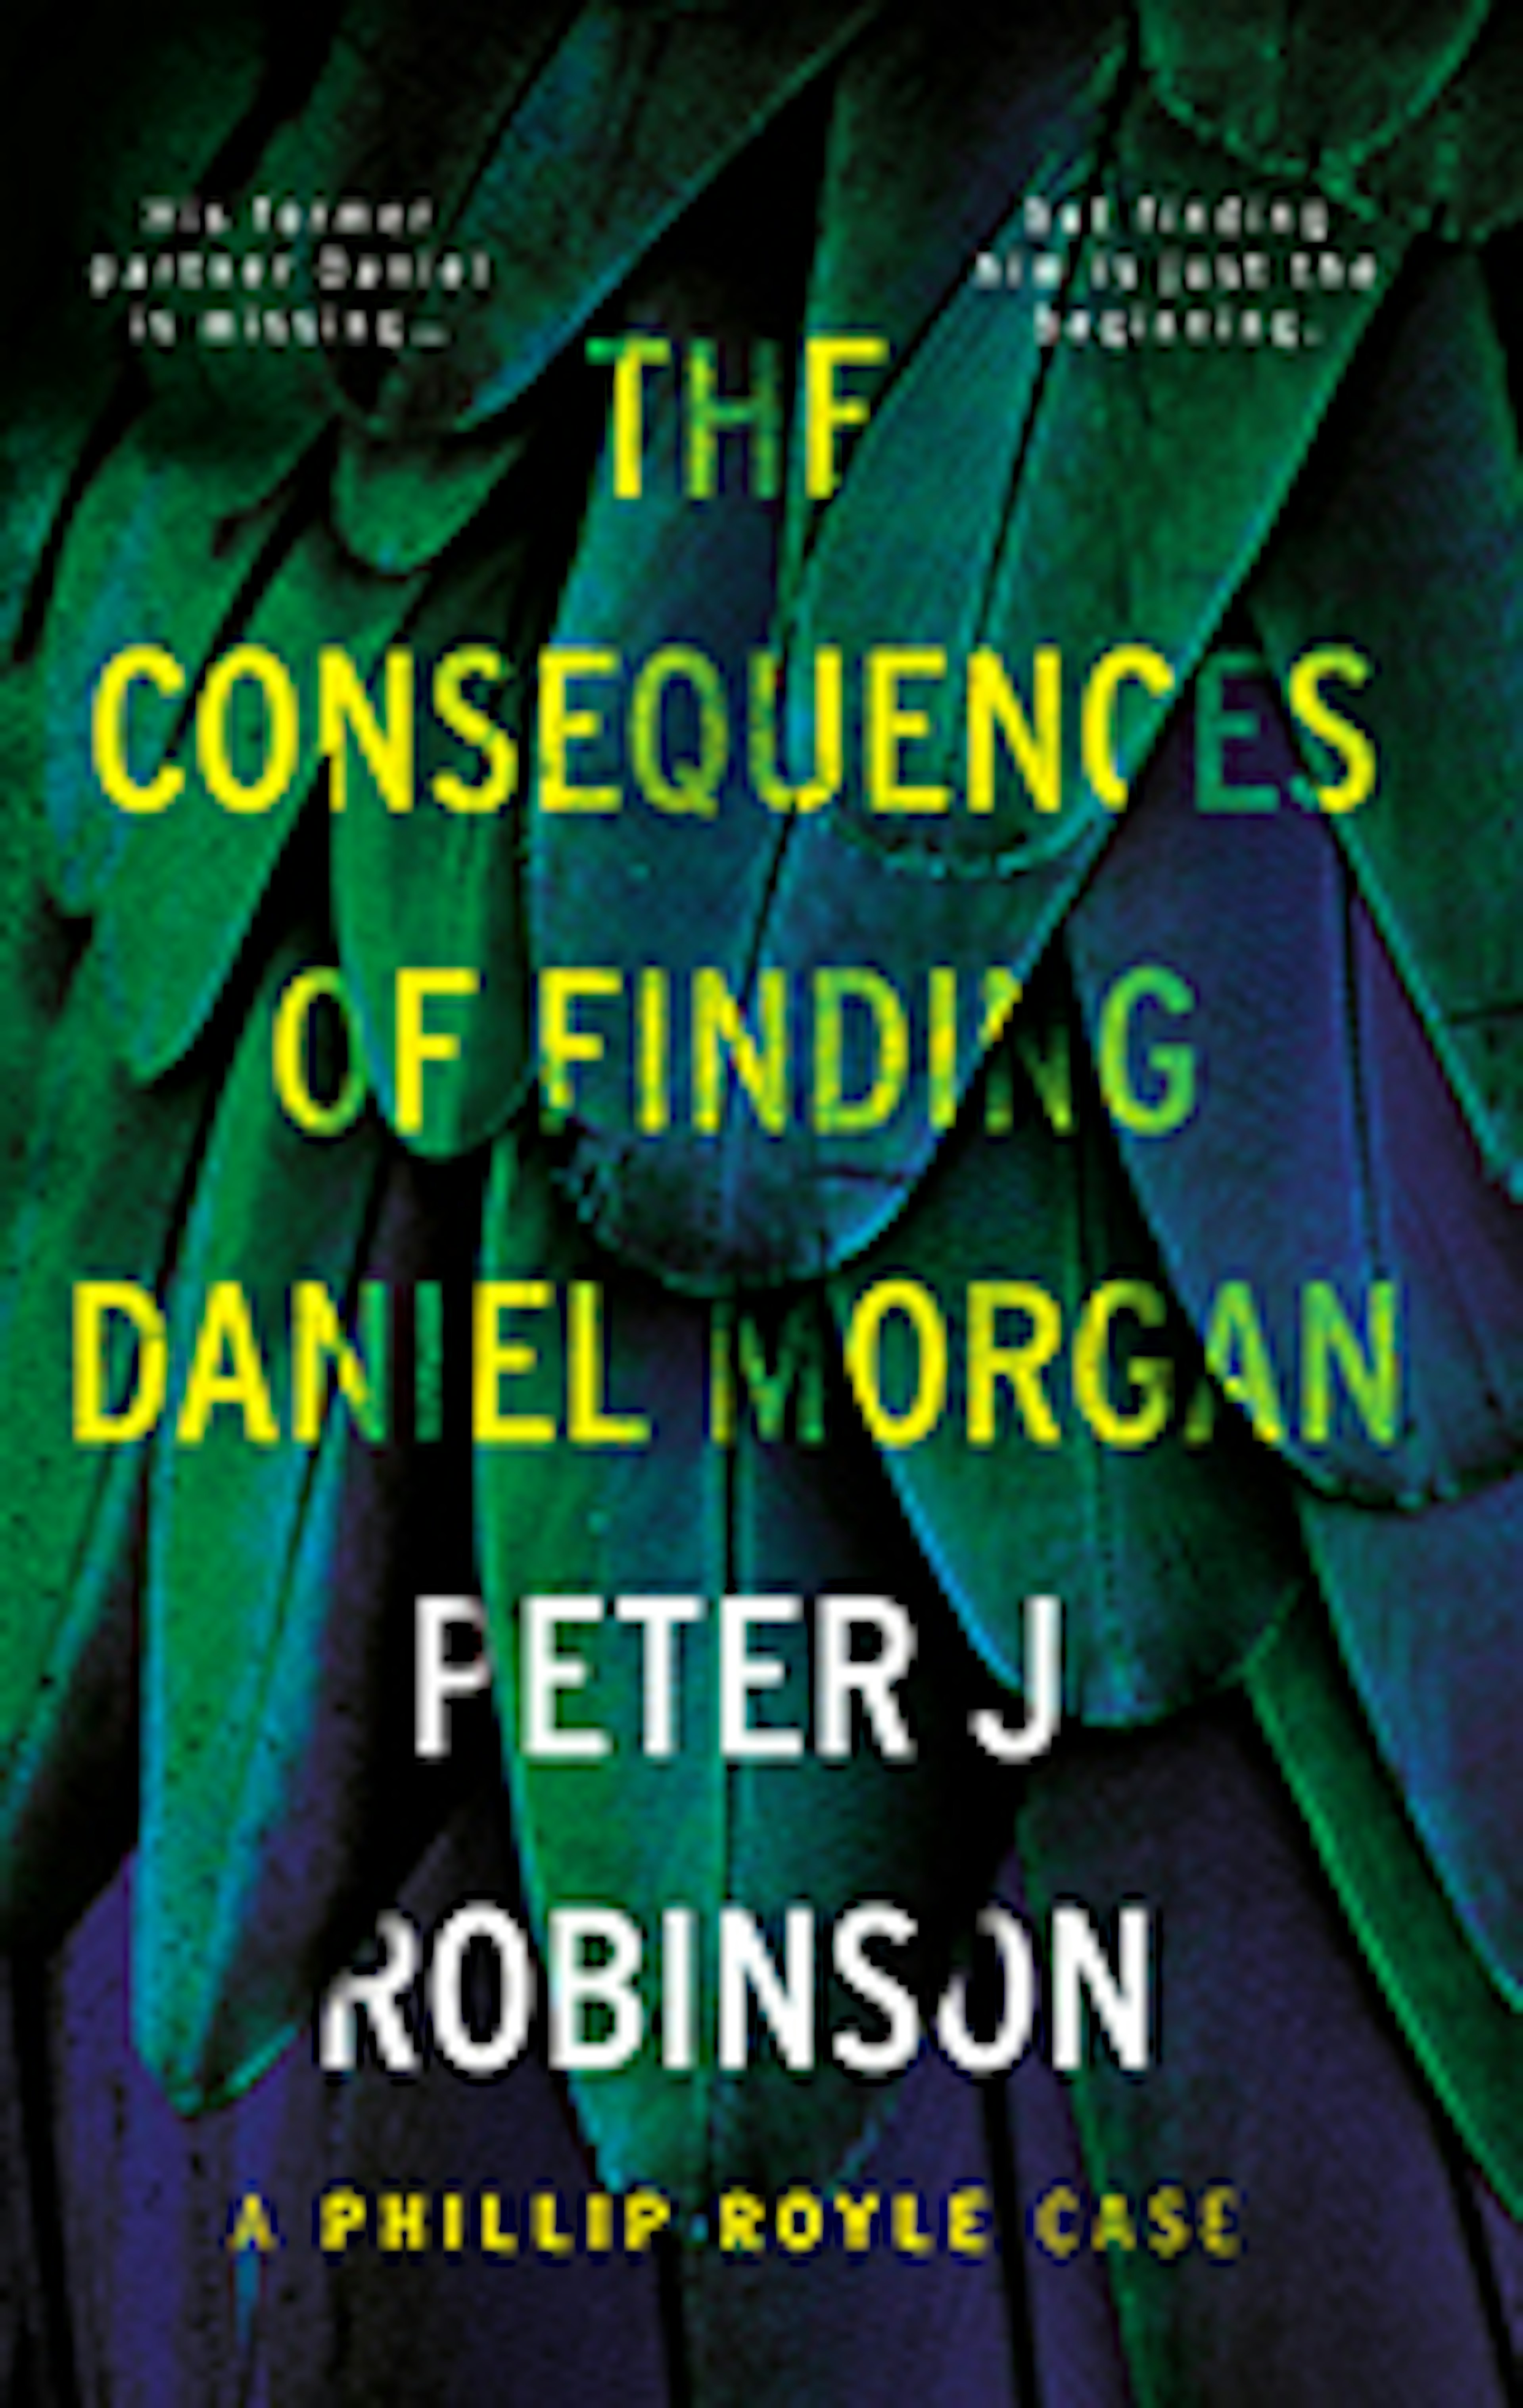 The Consequences of Finding Daniel Morgan